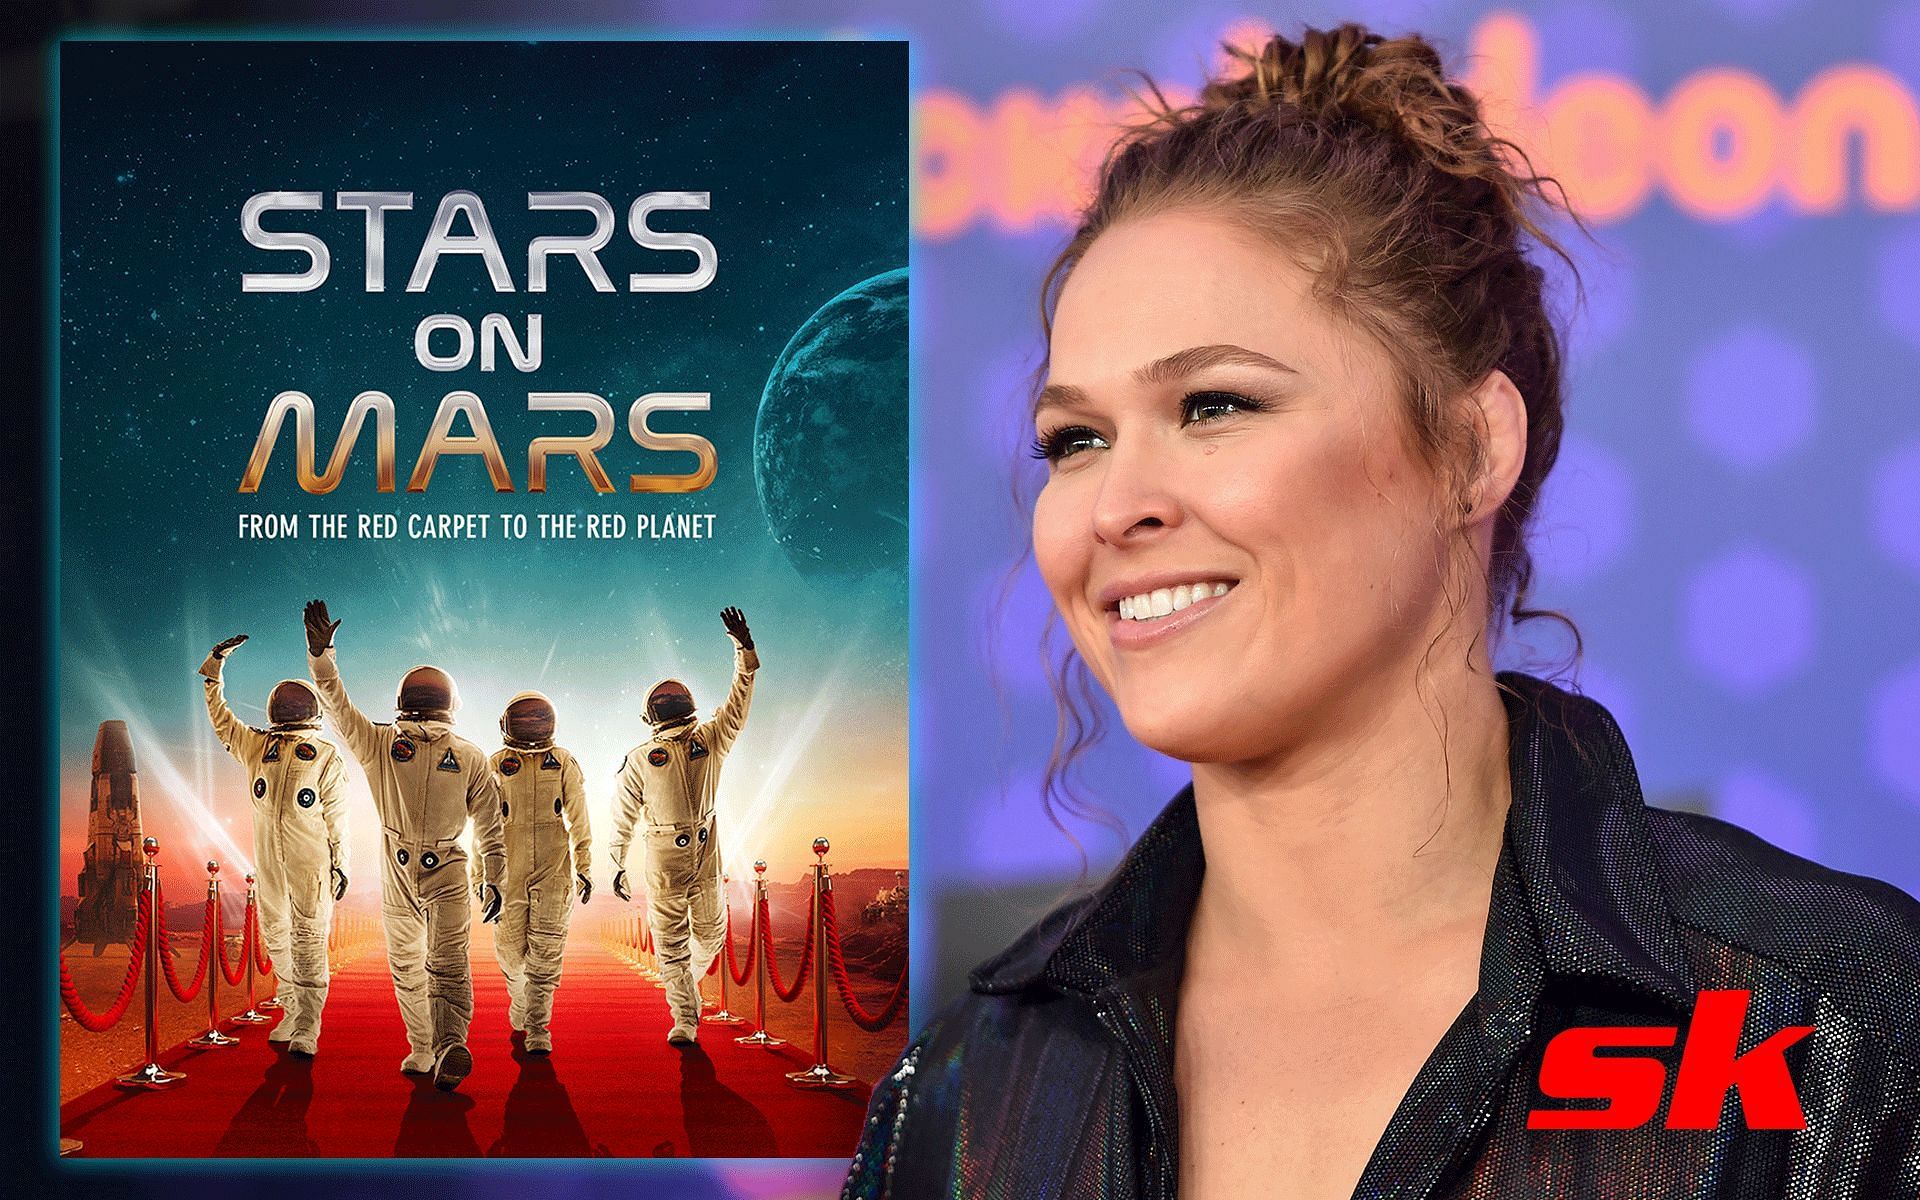 Stars on Mars (left) and Ronda Rousey (right) [Image credits: Getty Images and @TuSubtitulocom on Twitter ]